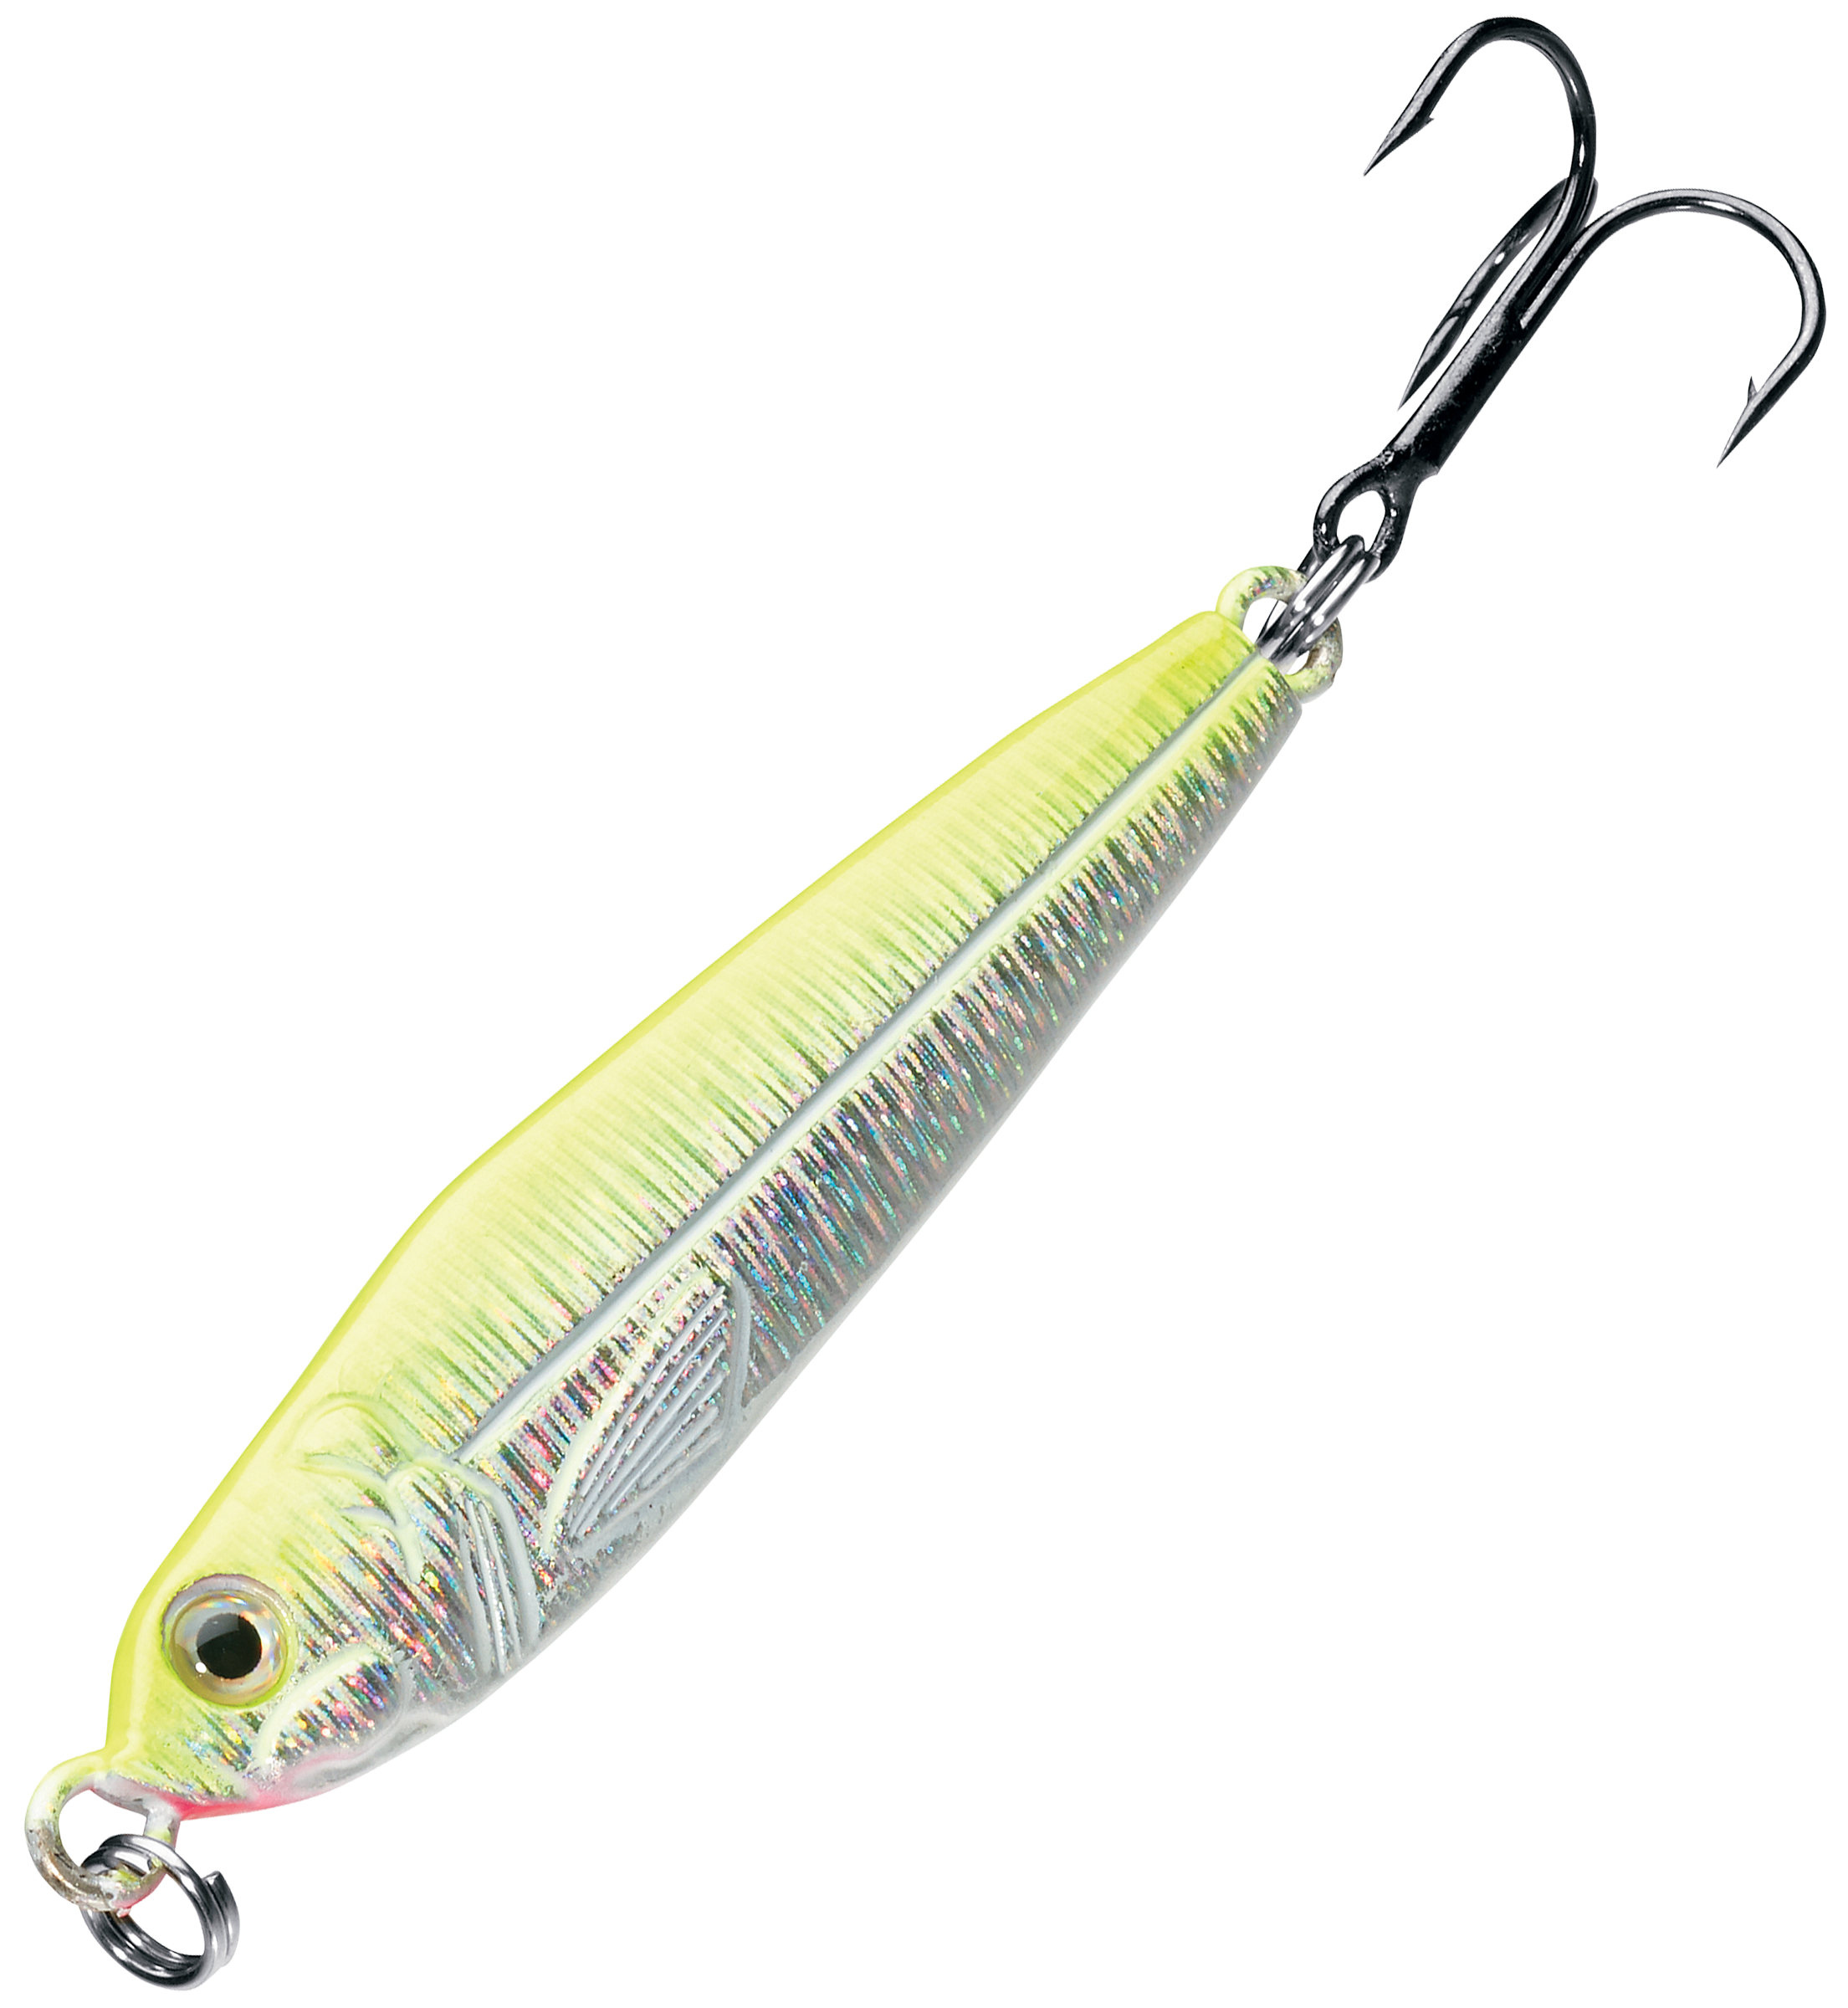 Cabela's RealImage Jig-N-Spoon - 1 oz. - Chartreuse Shad